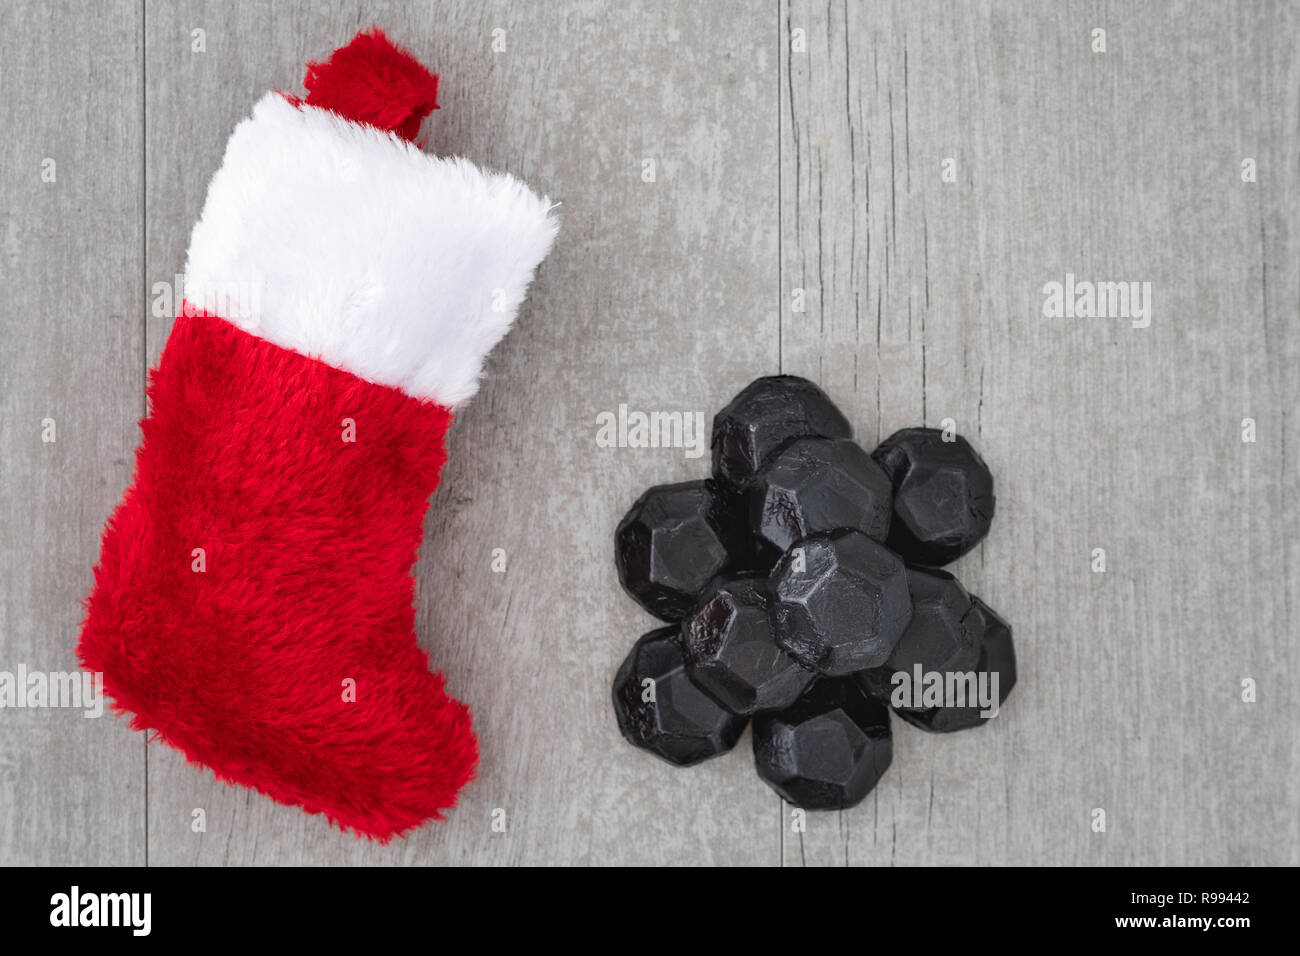 Red and white Christmas stocking and pile of coal shaped candy on a gray washed wood background, as a naughty for Christmas concept Stock Photo